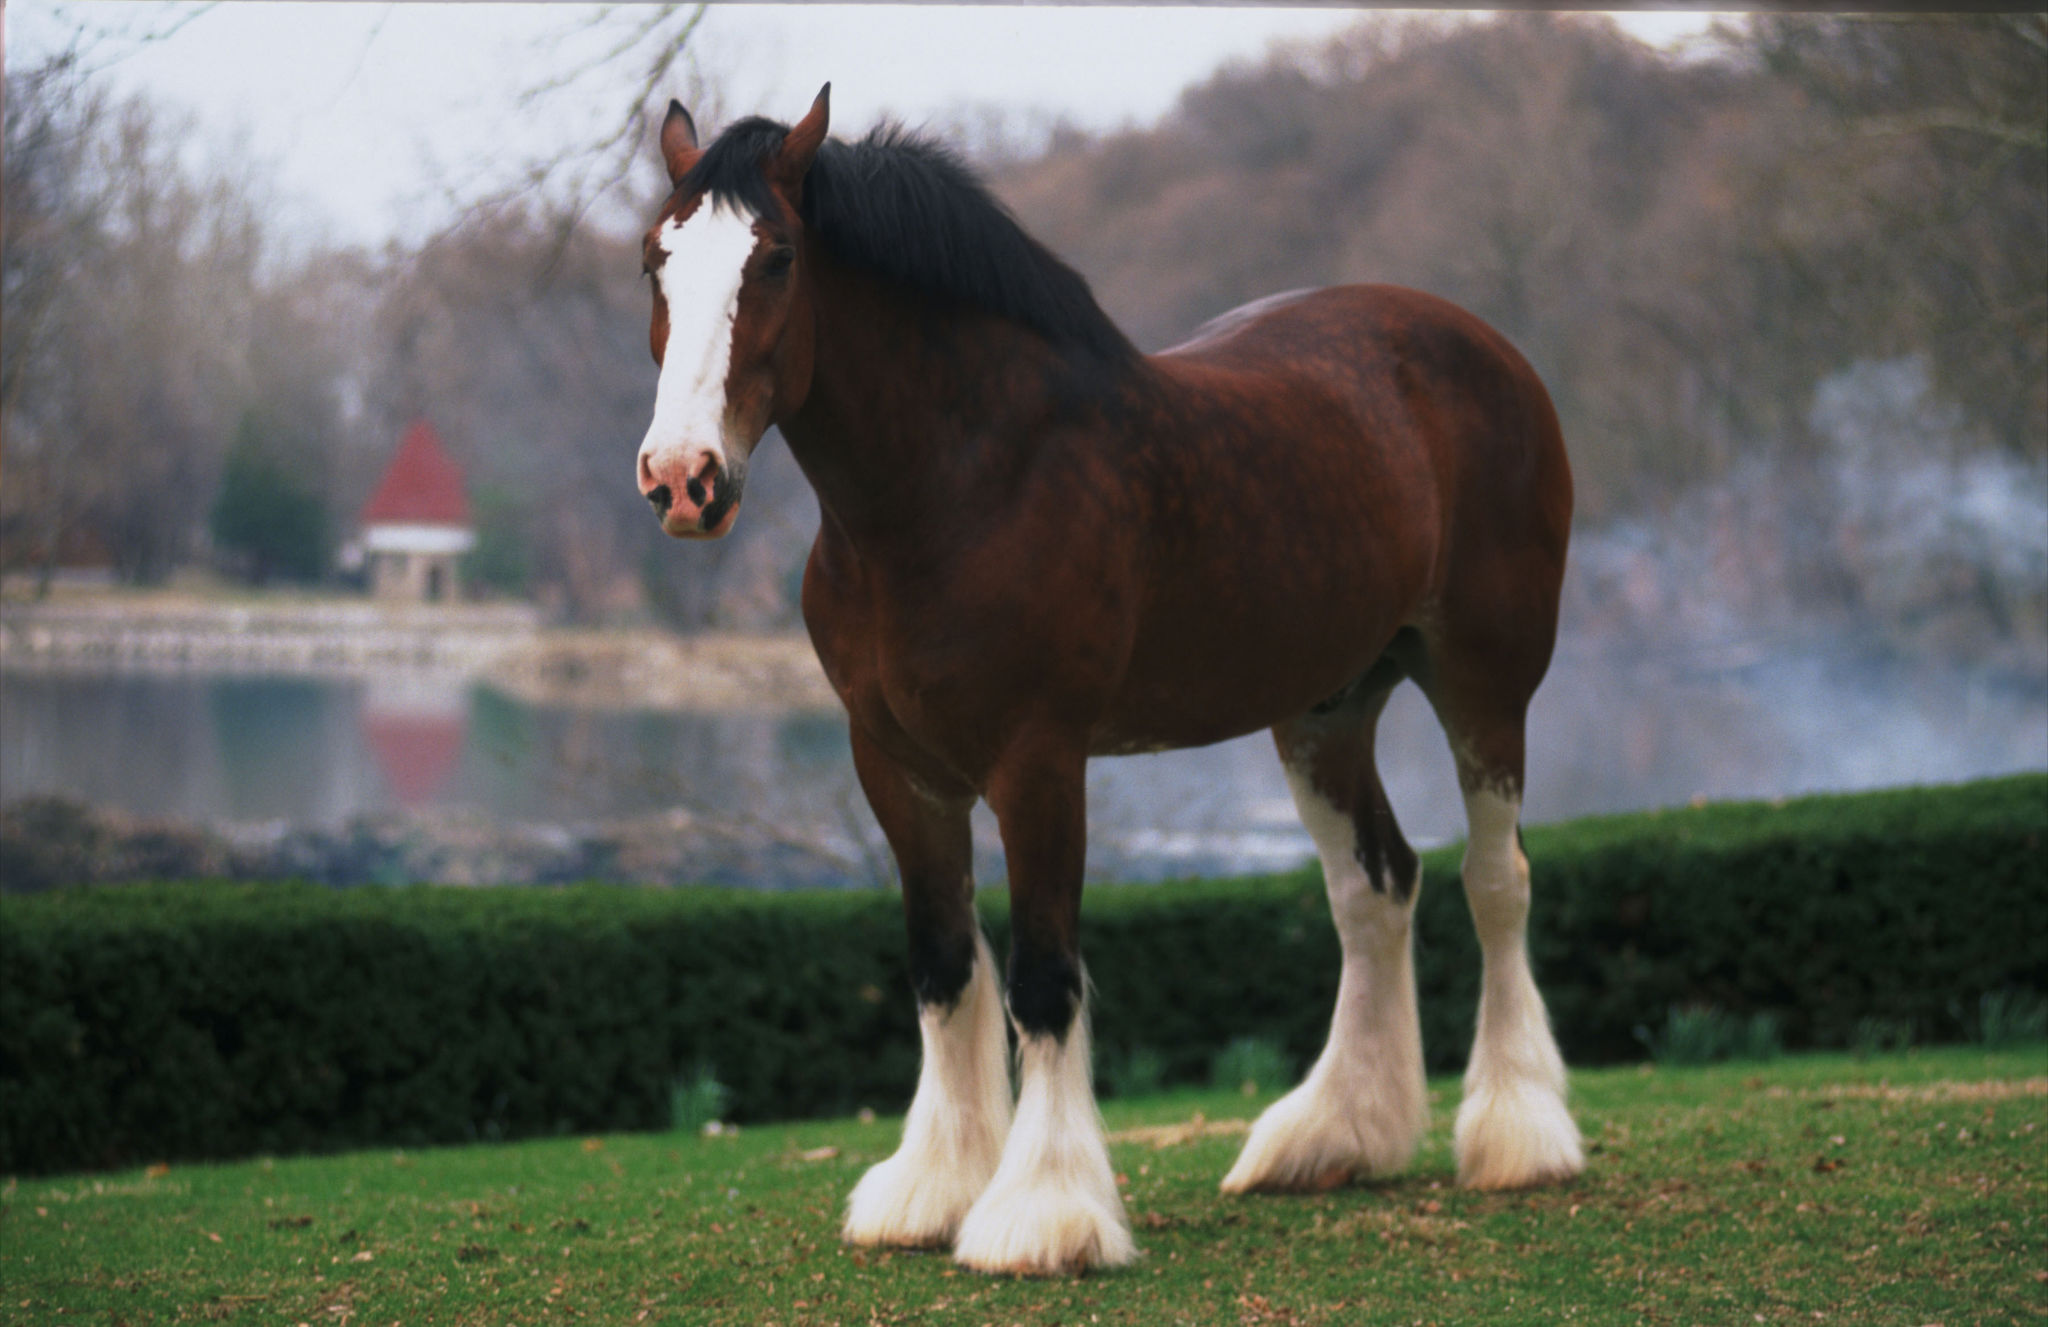 Budweiser Clydesdales Wallpaper Budweiser clydesdales image